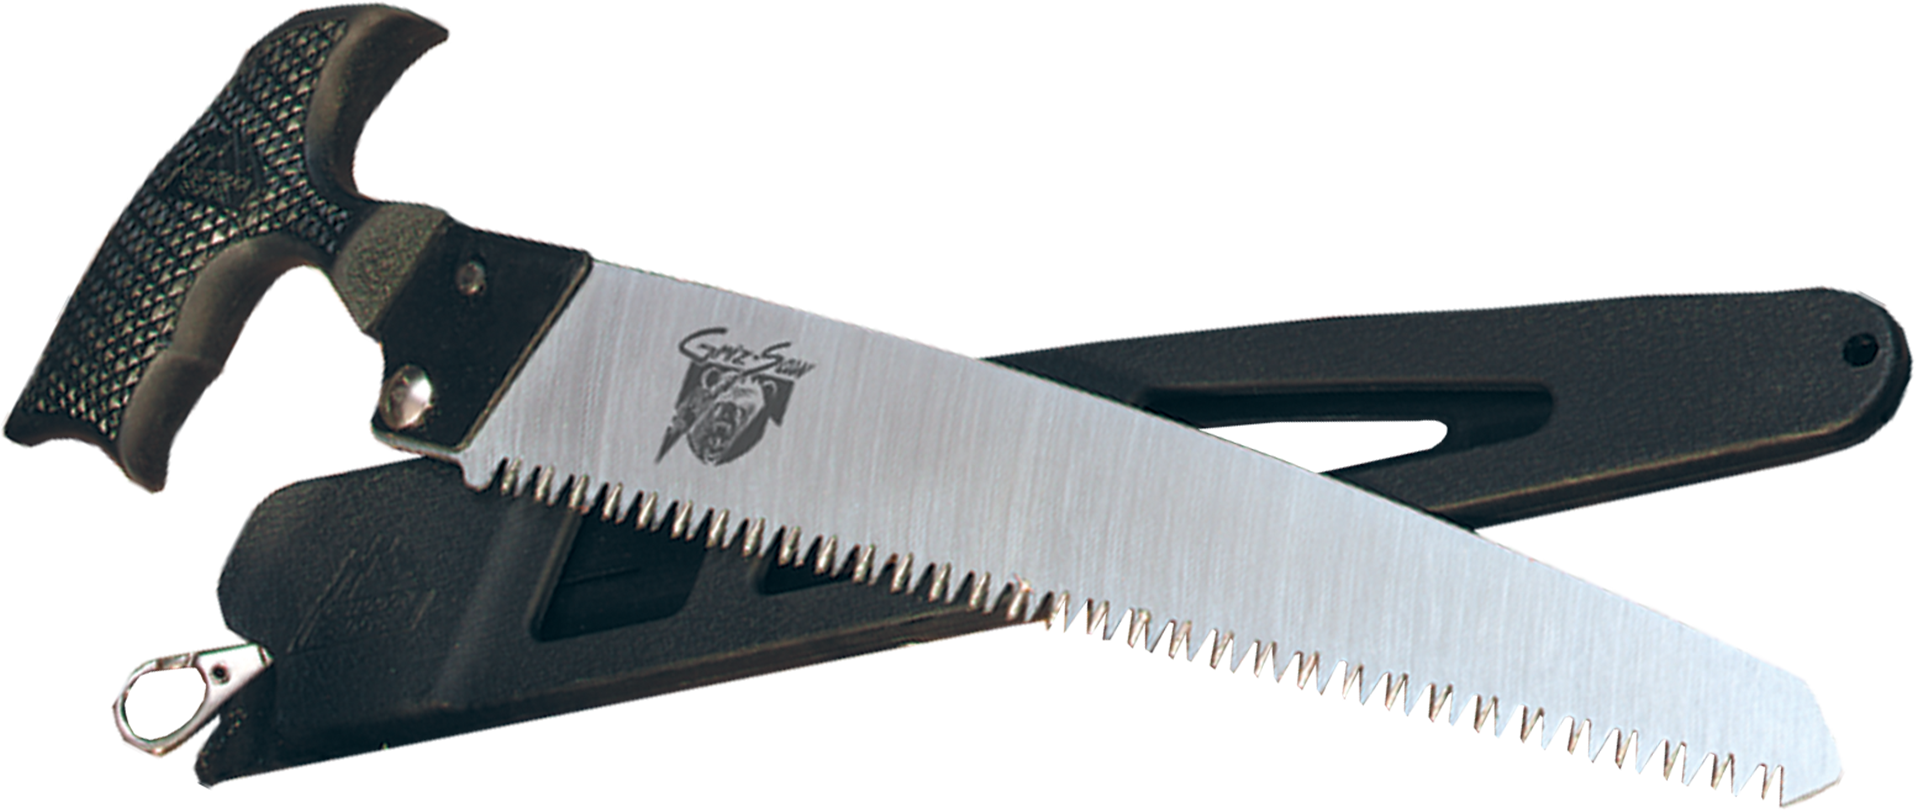 Outdoor Edge Griz Saw - Blister Card -  - Mansfield Hunting & Fishing - Products to prepare for Corona Virus